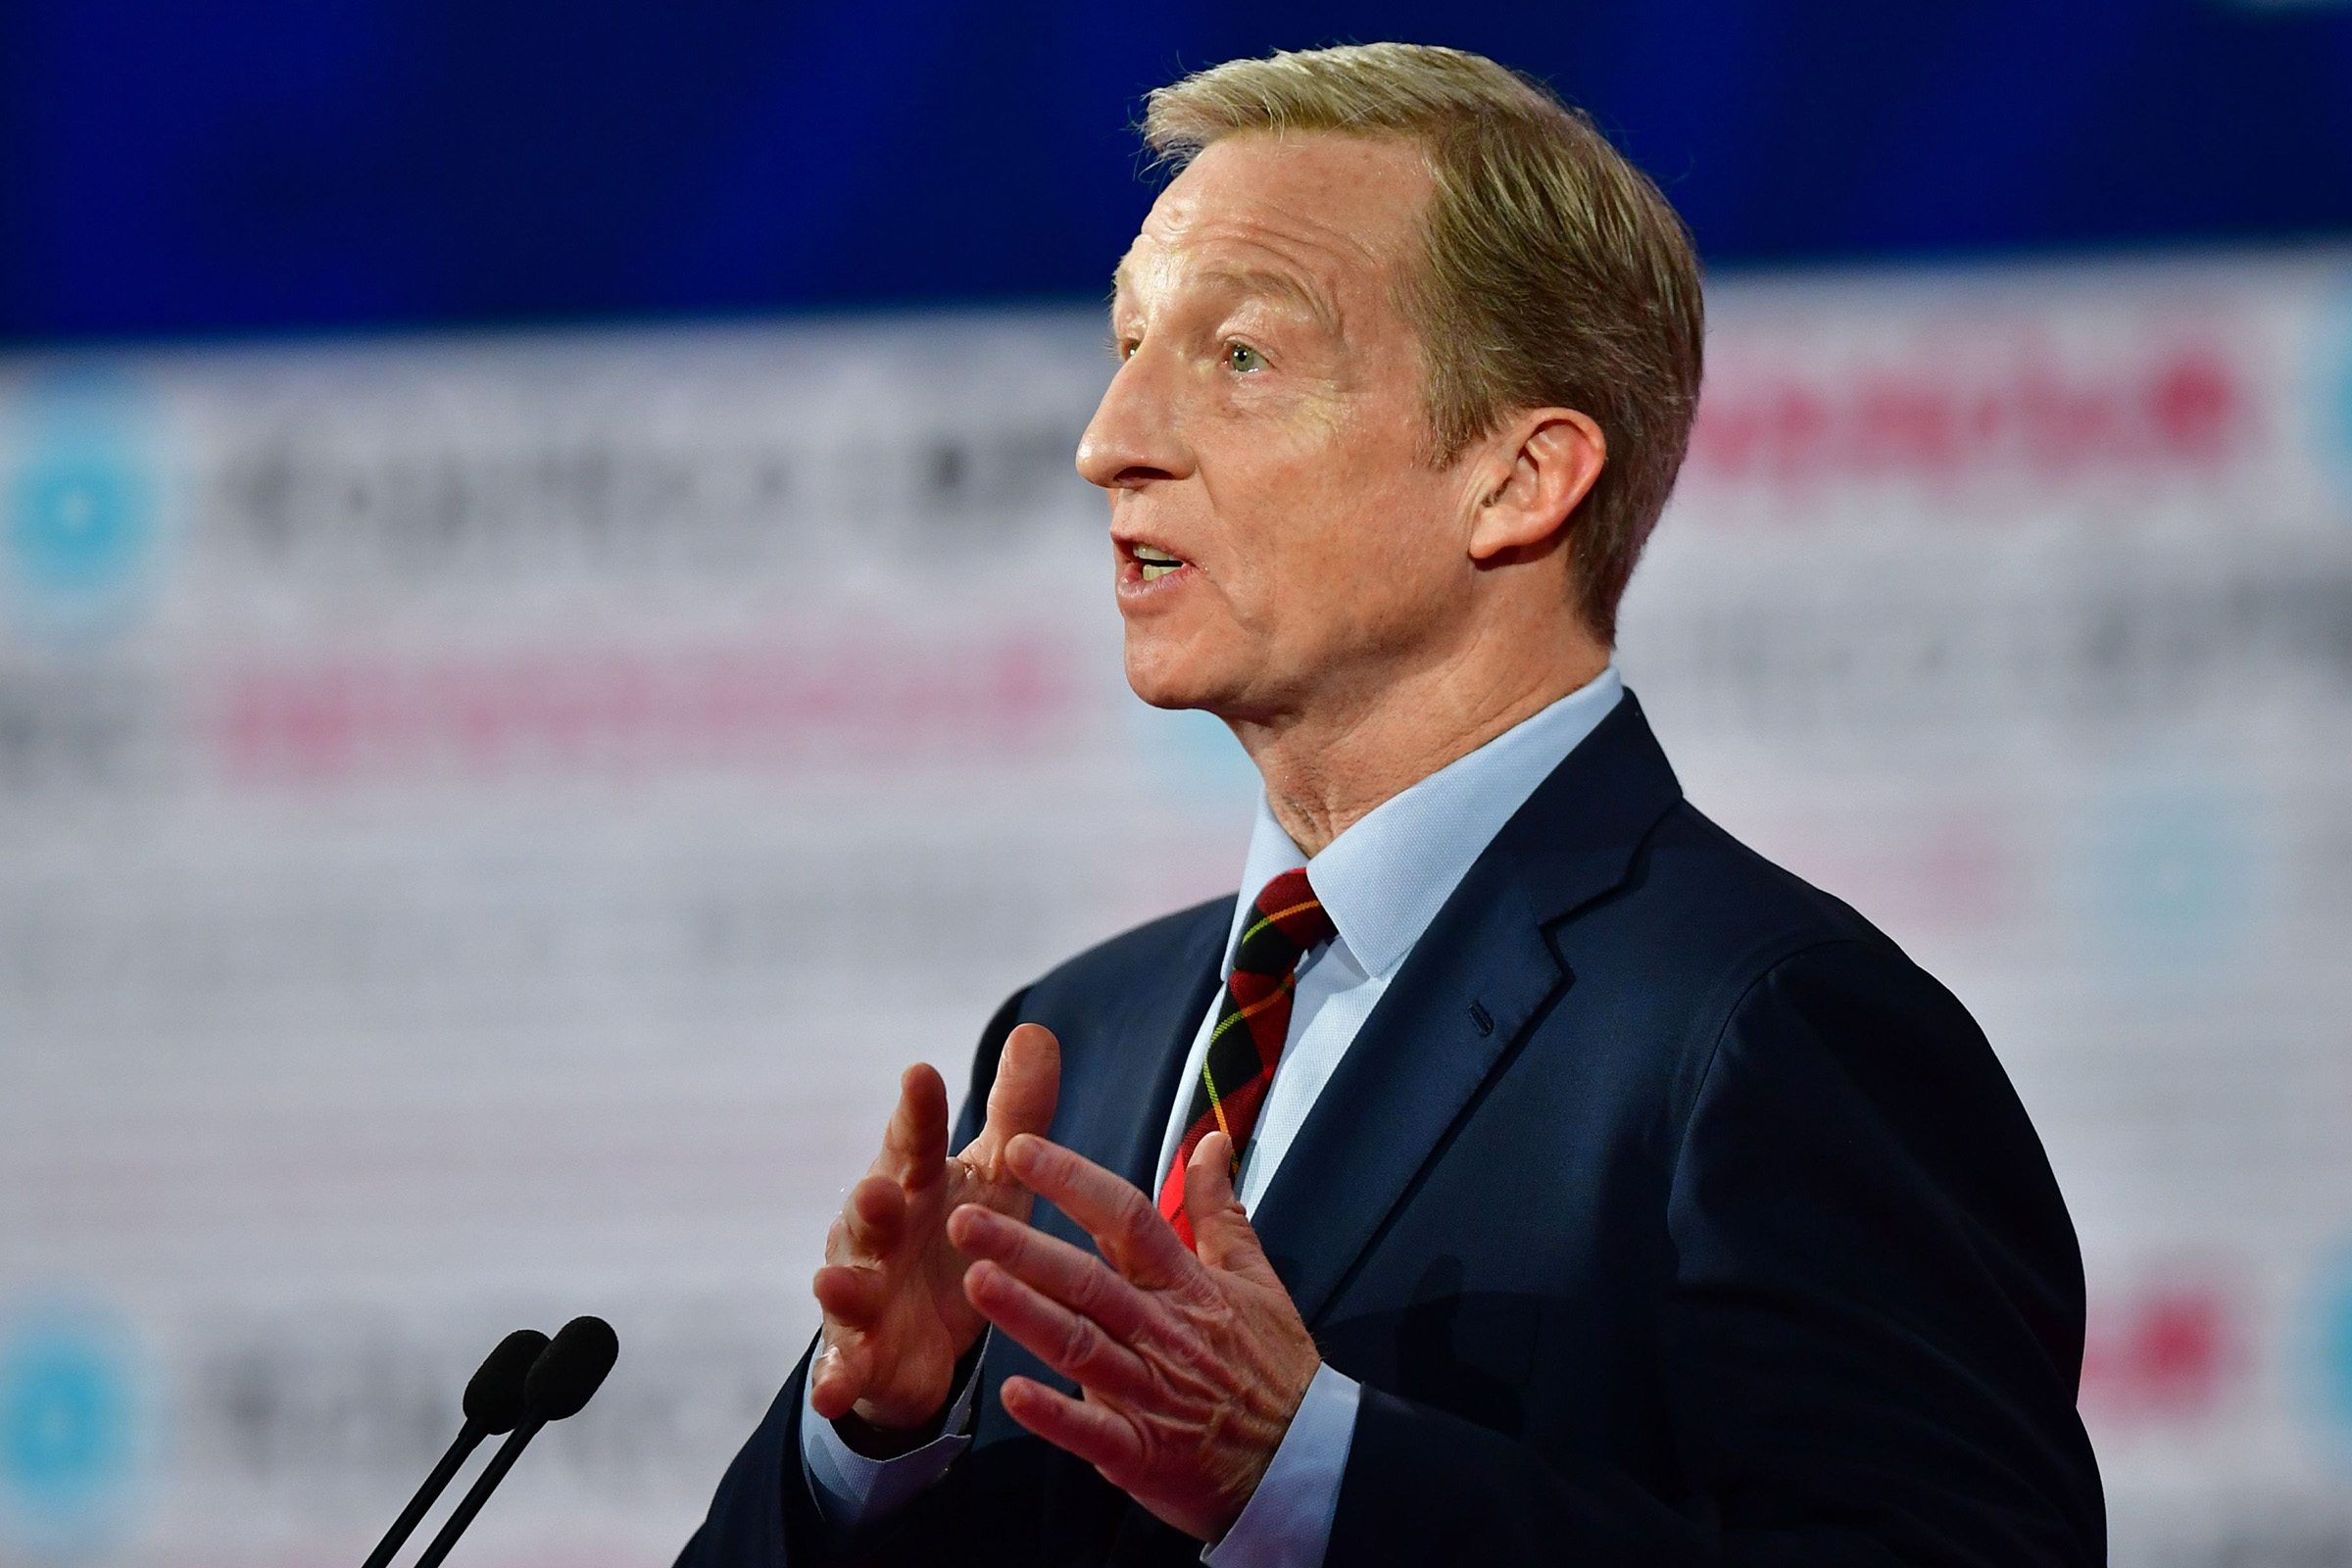 Democratic presidential hopeful billionaire and philanthropist Tom Steyer speaks on stage during the sixth Democratic primary debate of the 2020 presidential campaign in Los Angeles on Dec. 19, 2019. (Frederic J. Brown—AFP via Getty Images)